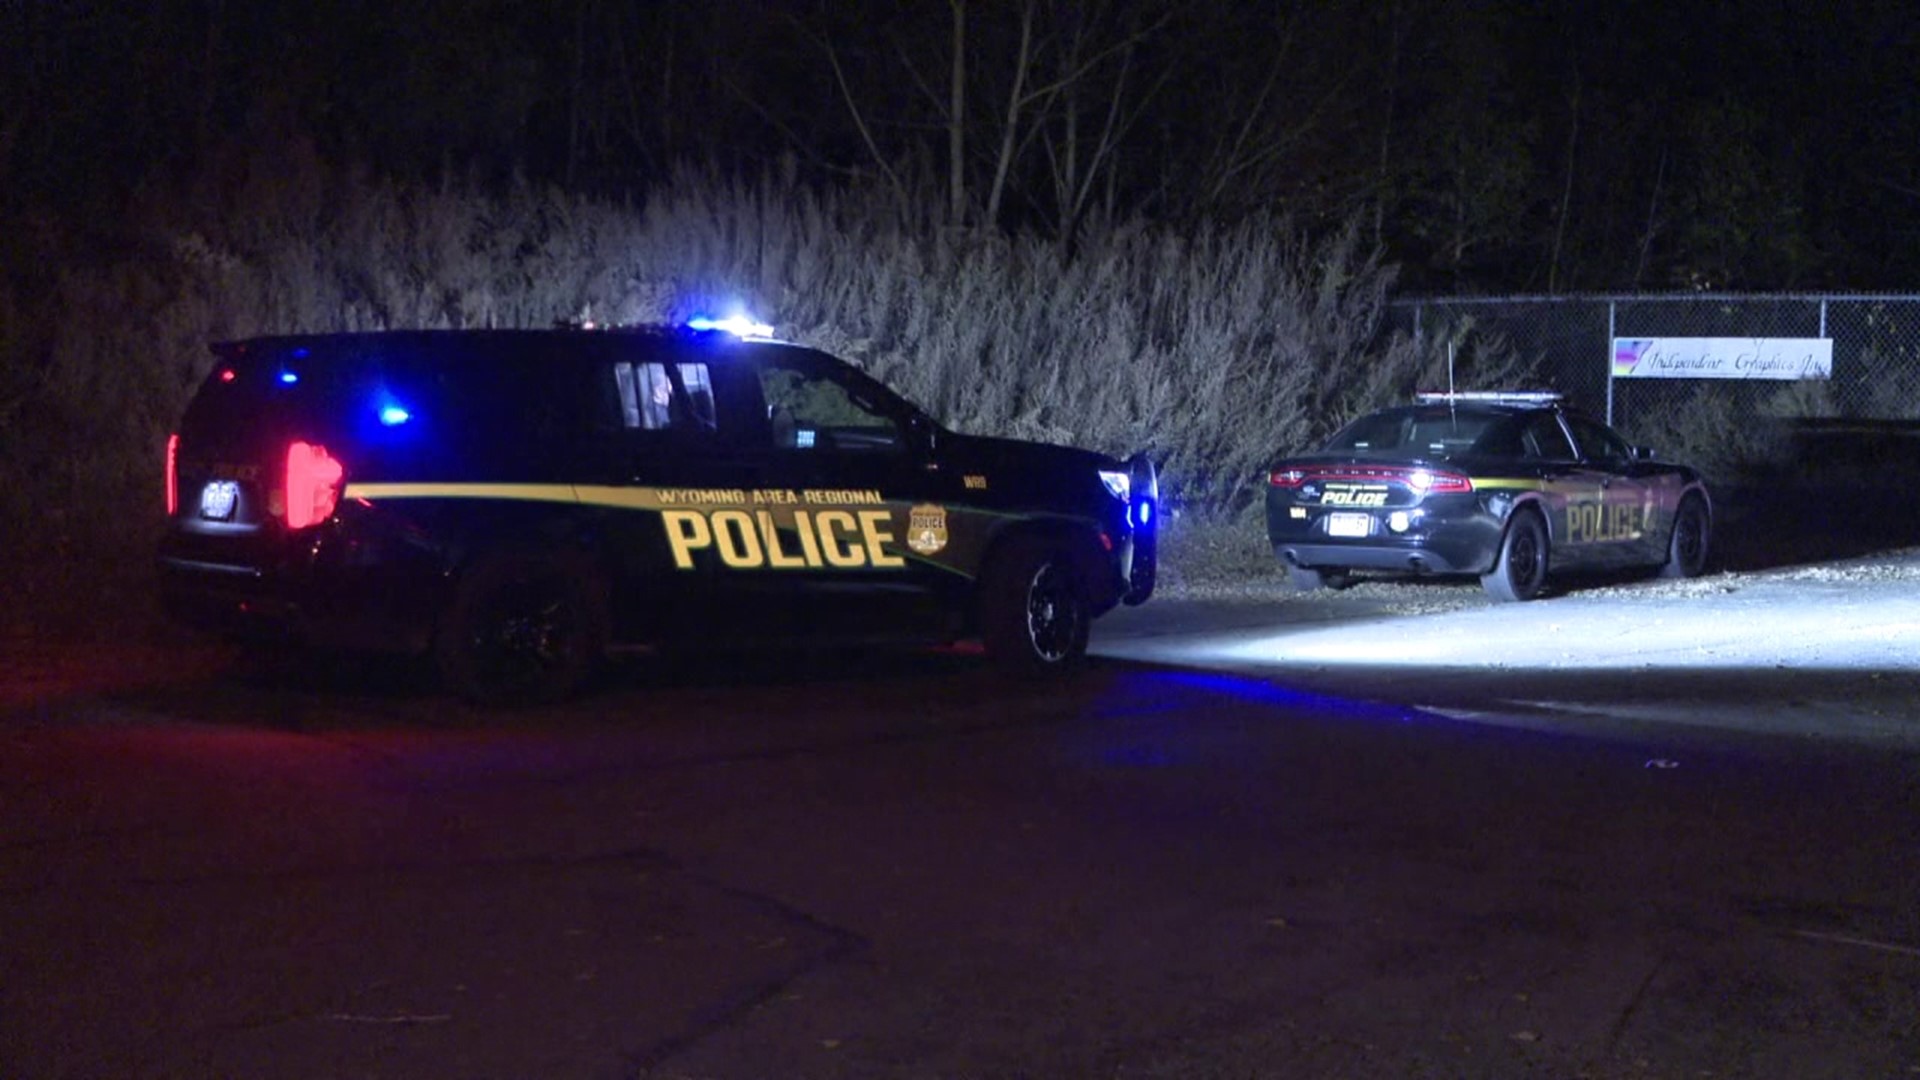 One person is in custody after a stabbing in Luzerne County